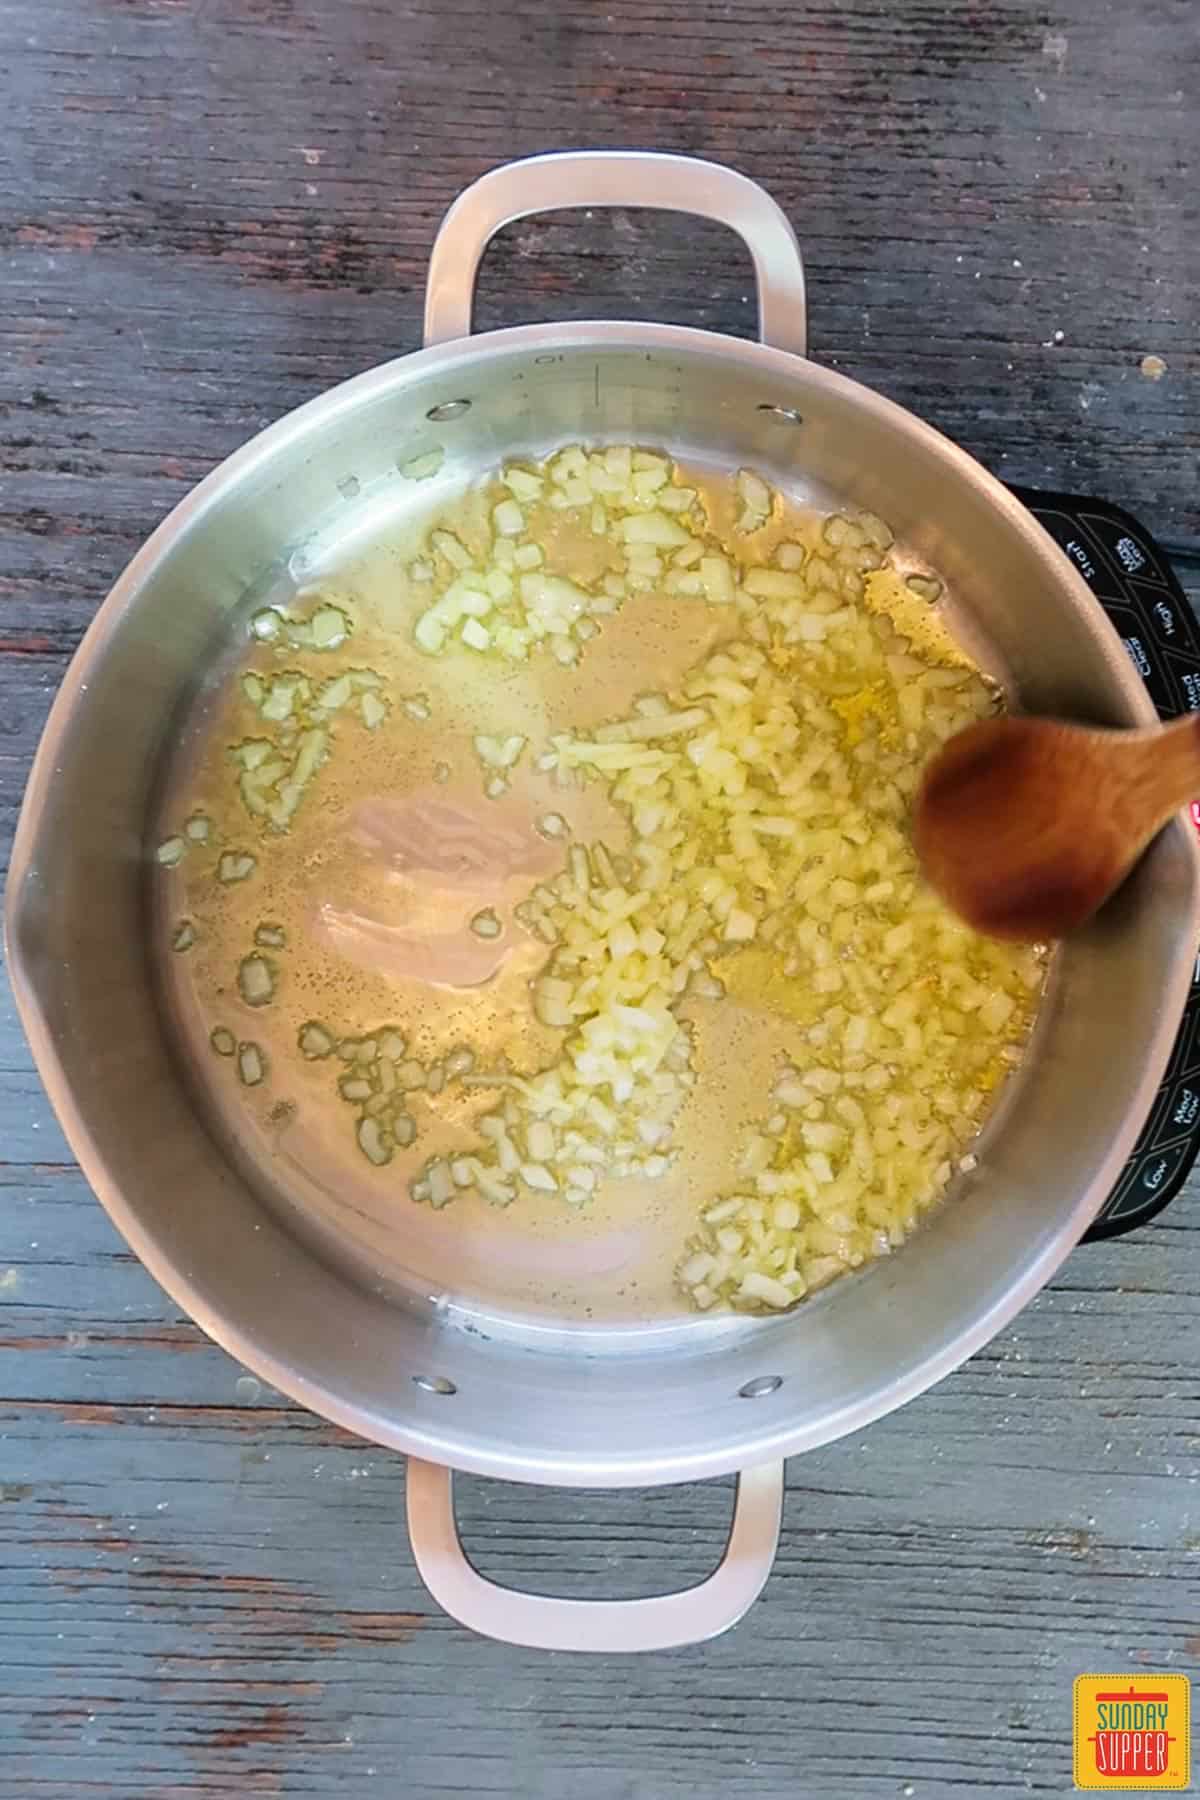 Cooking onions in a pot for Italian wedding soup